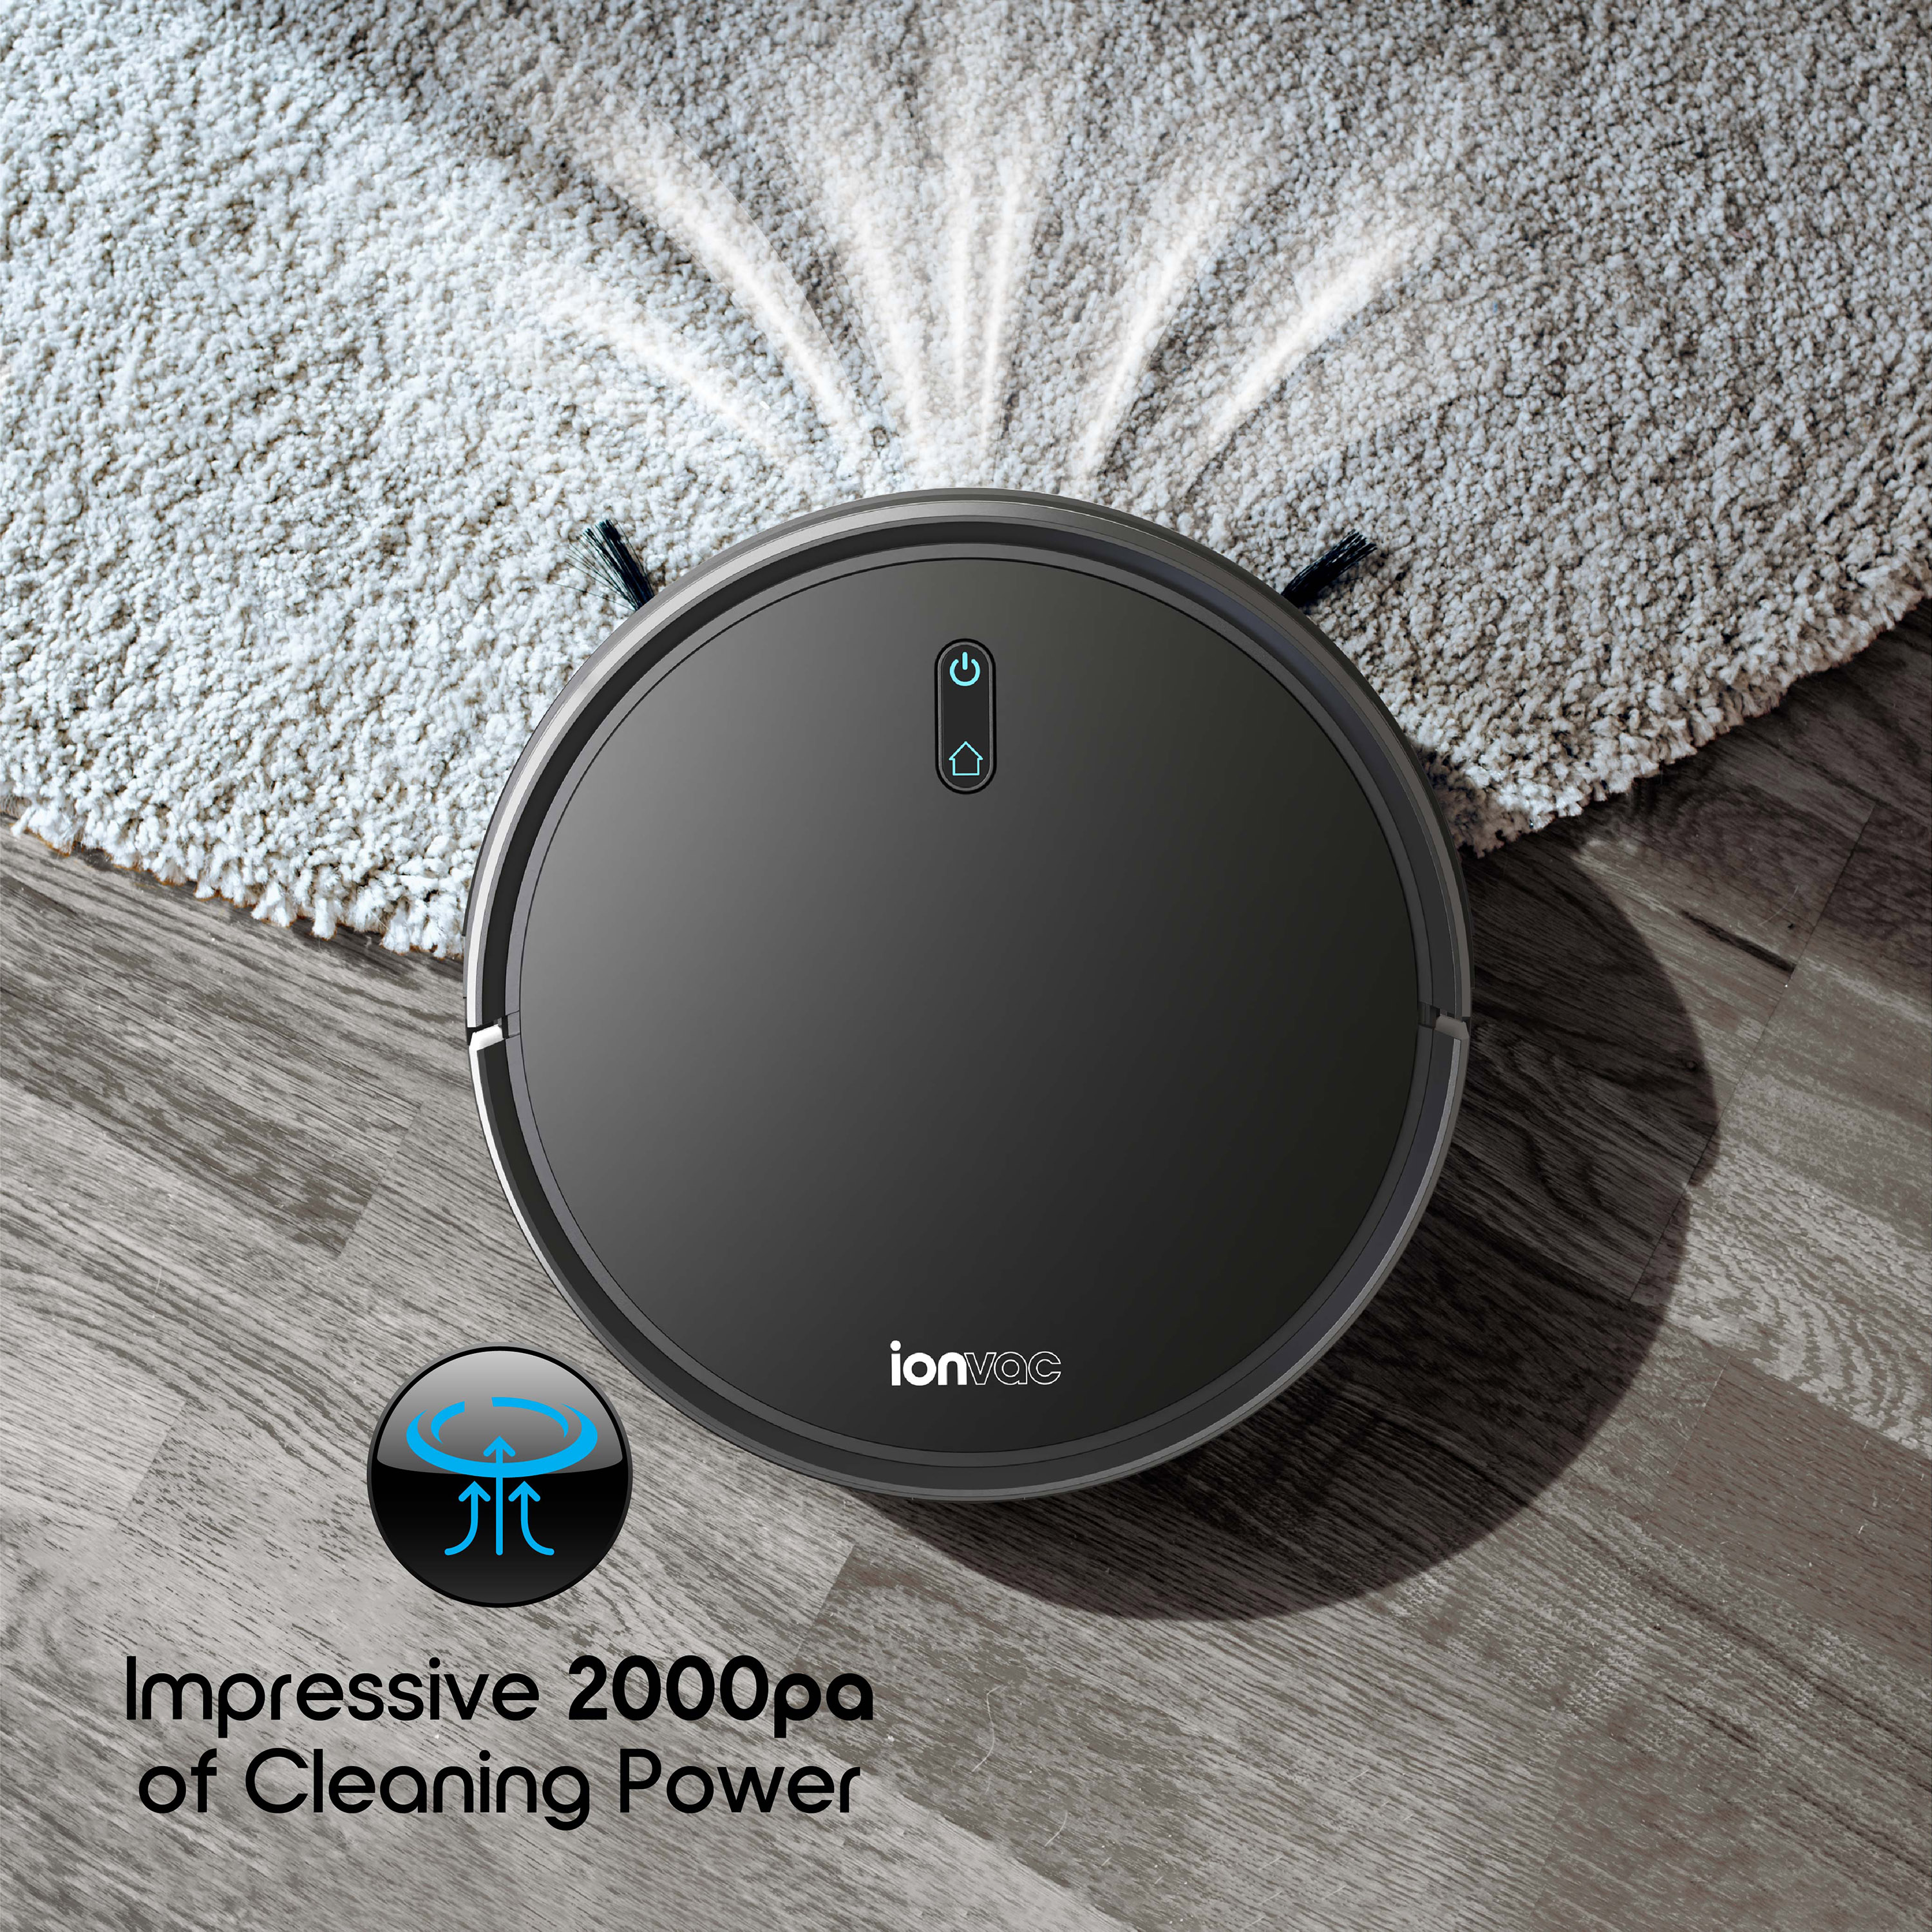 IonVac UltraClean Robovac with Smart Mapping, Wi-Fi Robot Vacuum Cleaner with App/Remote Control - image 7 of 10